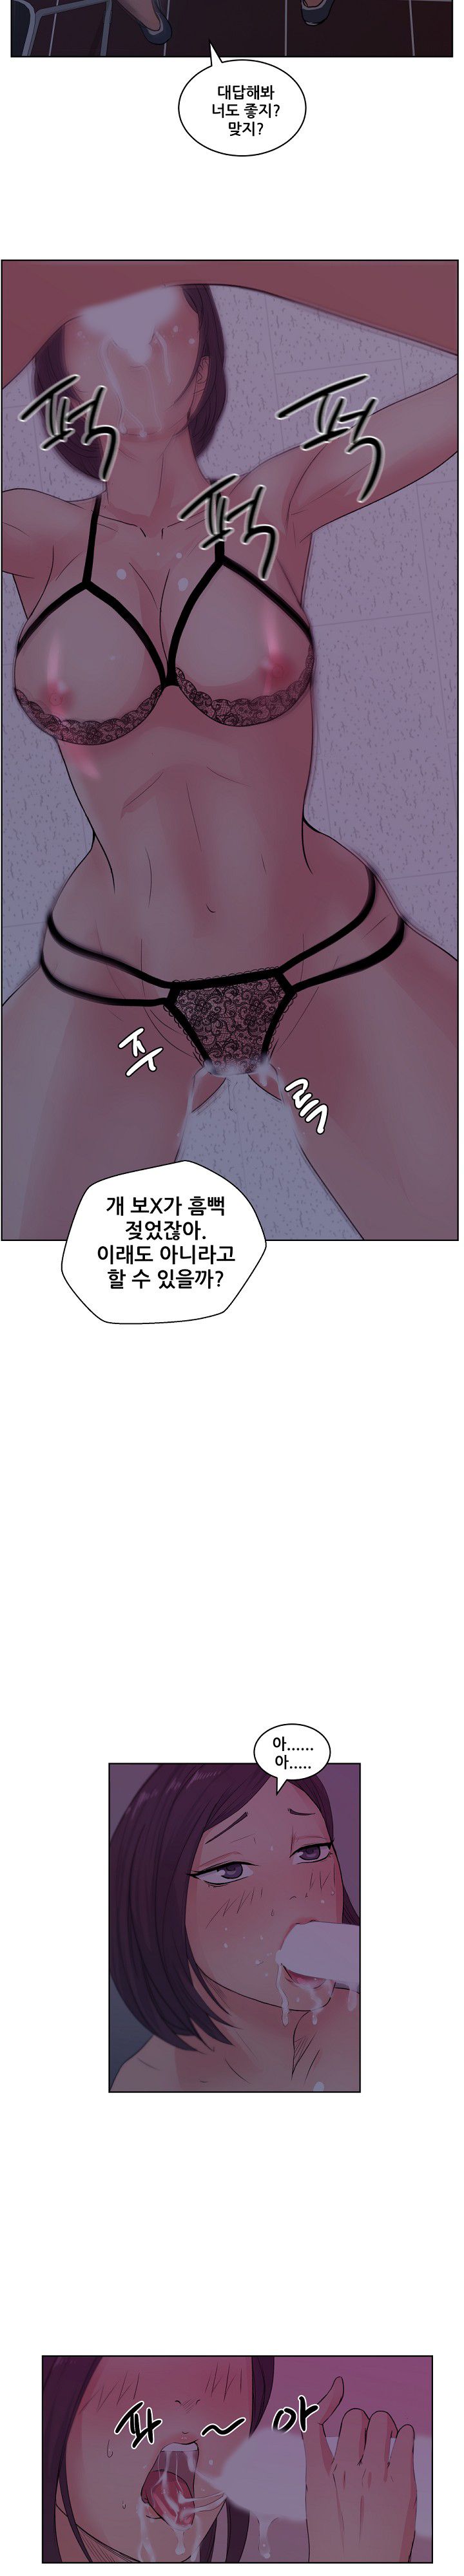 Sooyung Comic Shop Raw - Chapter 6 Page 10